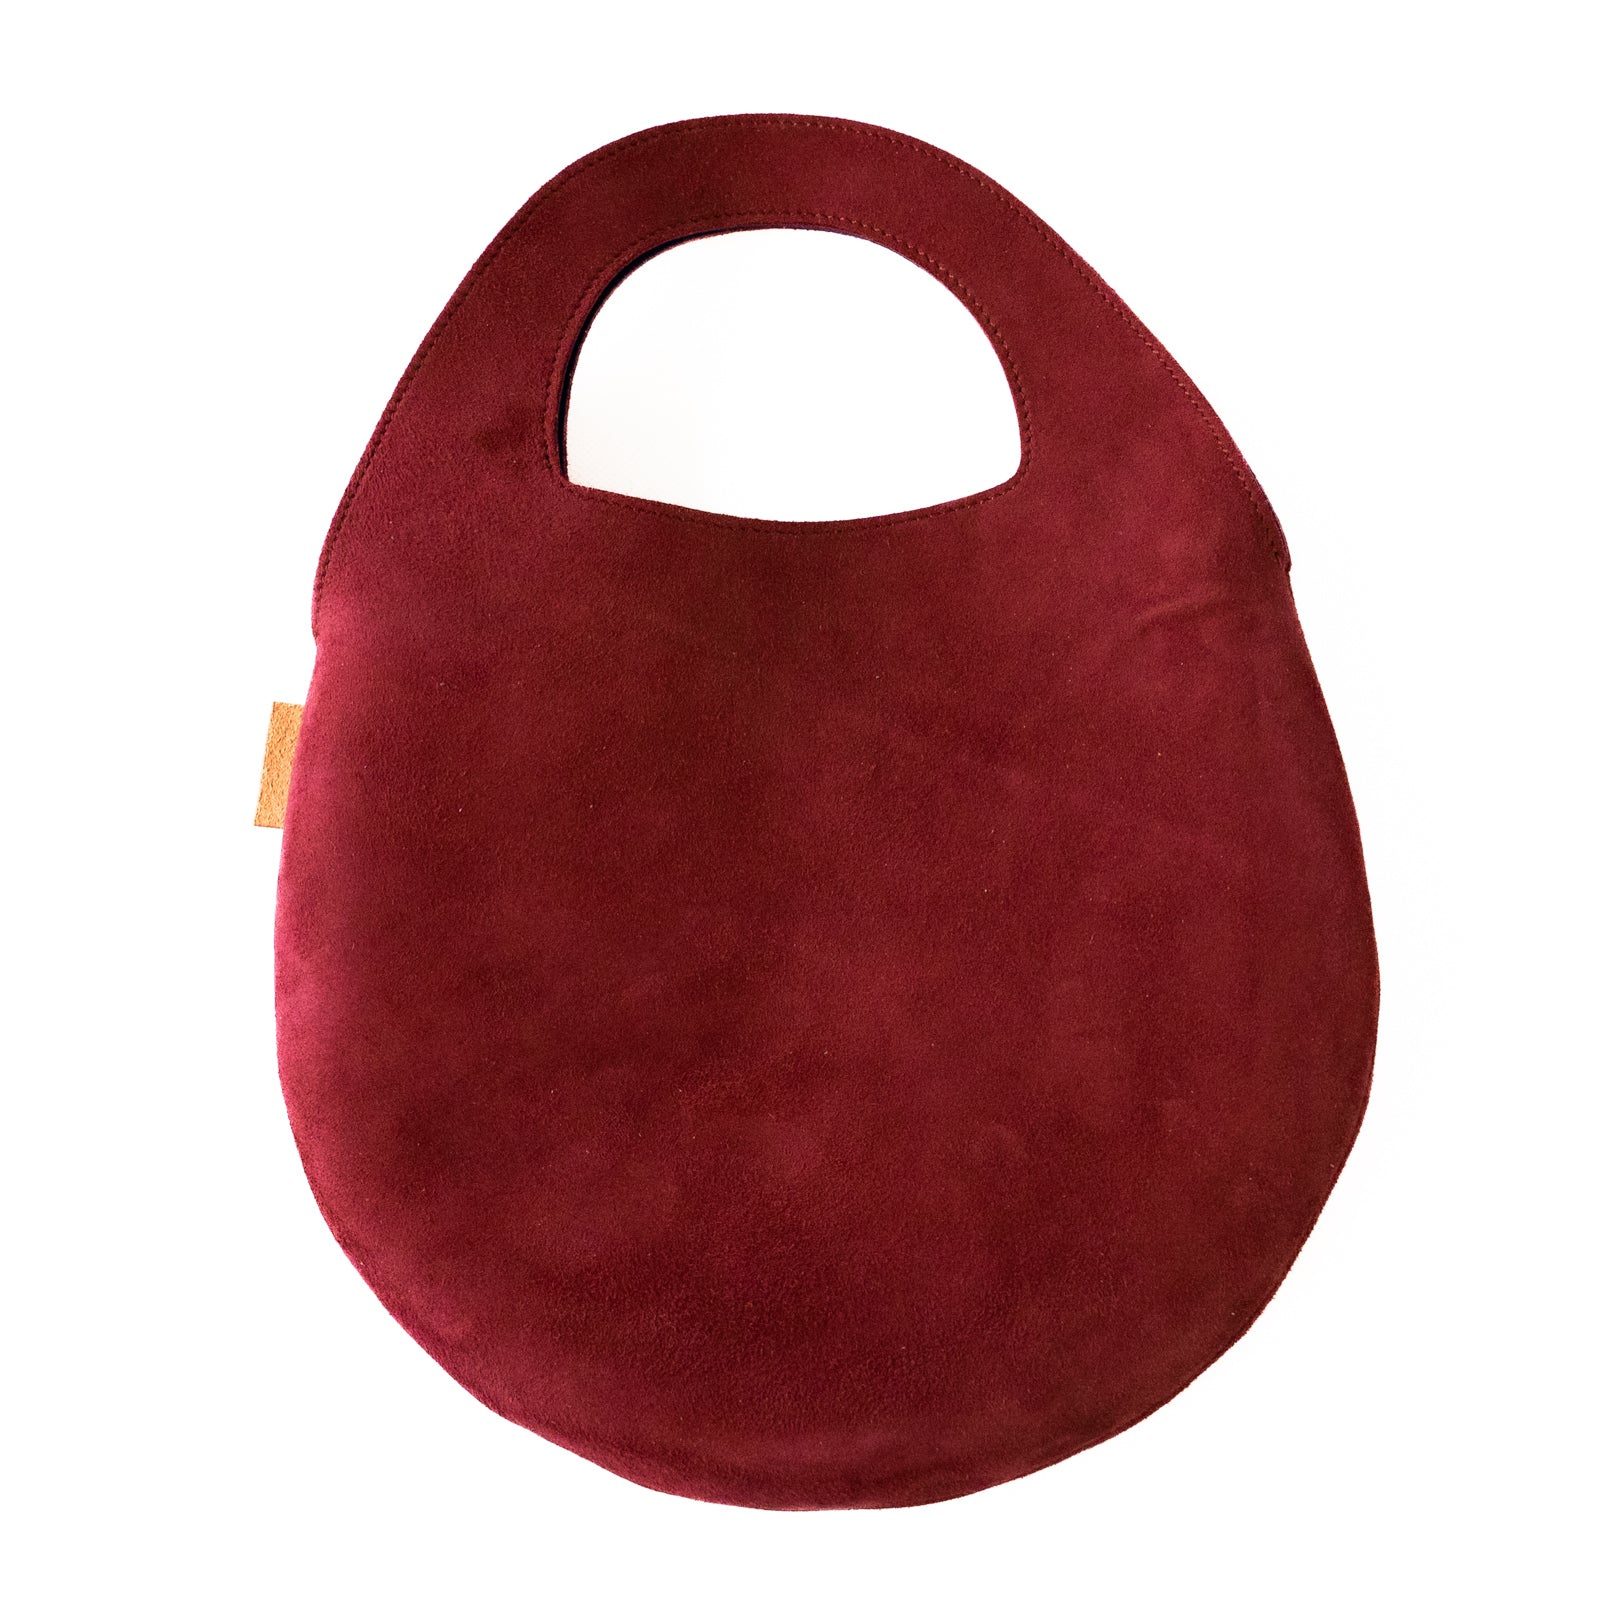 [6th Anniversary Sale] Egg Bag S Suede Leather